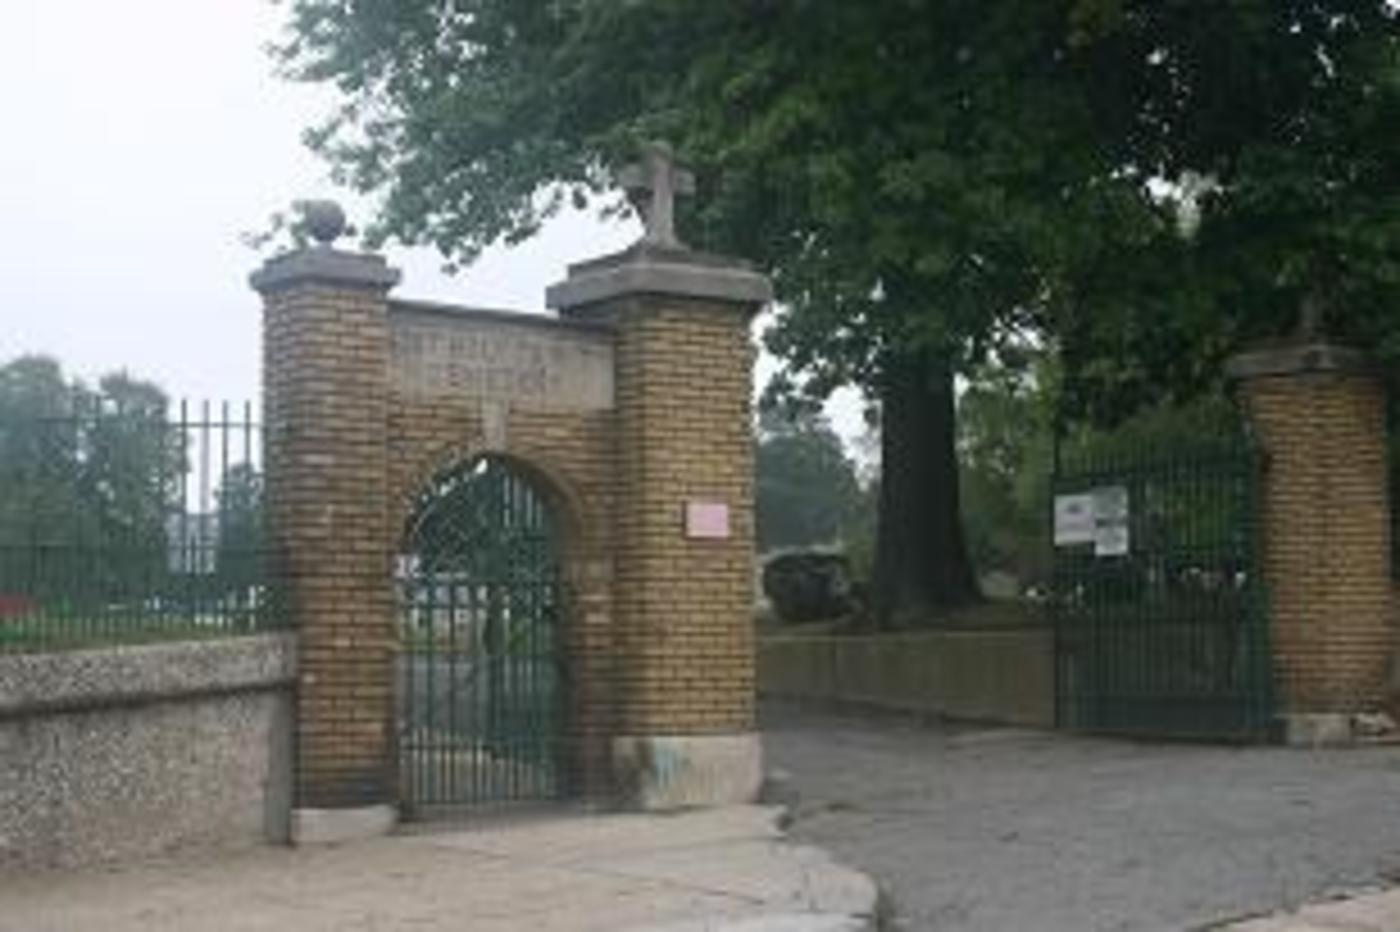 Cemetery Entrance in 2005